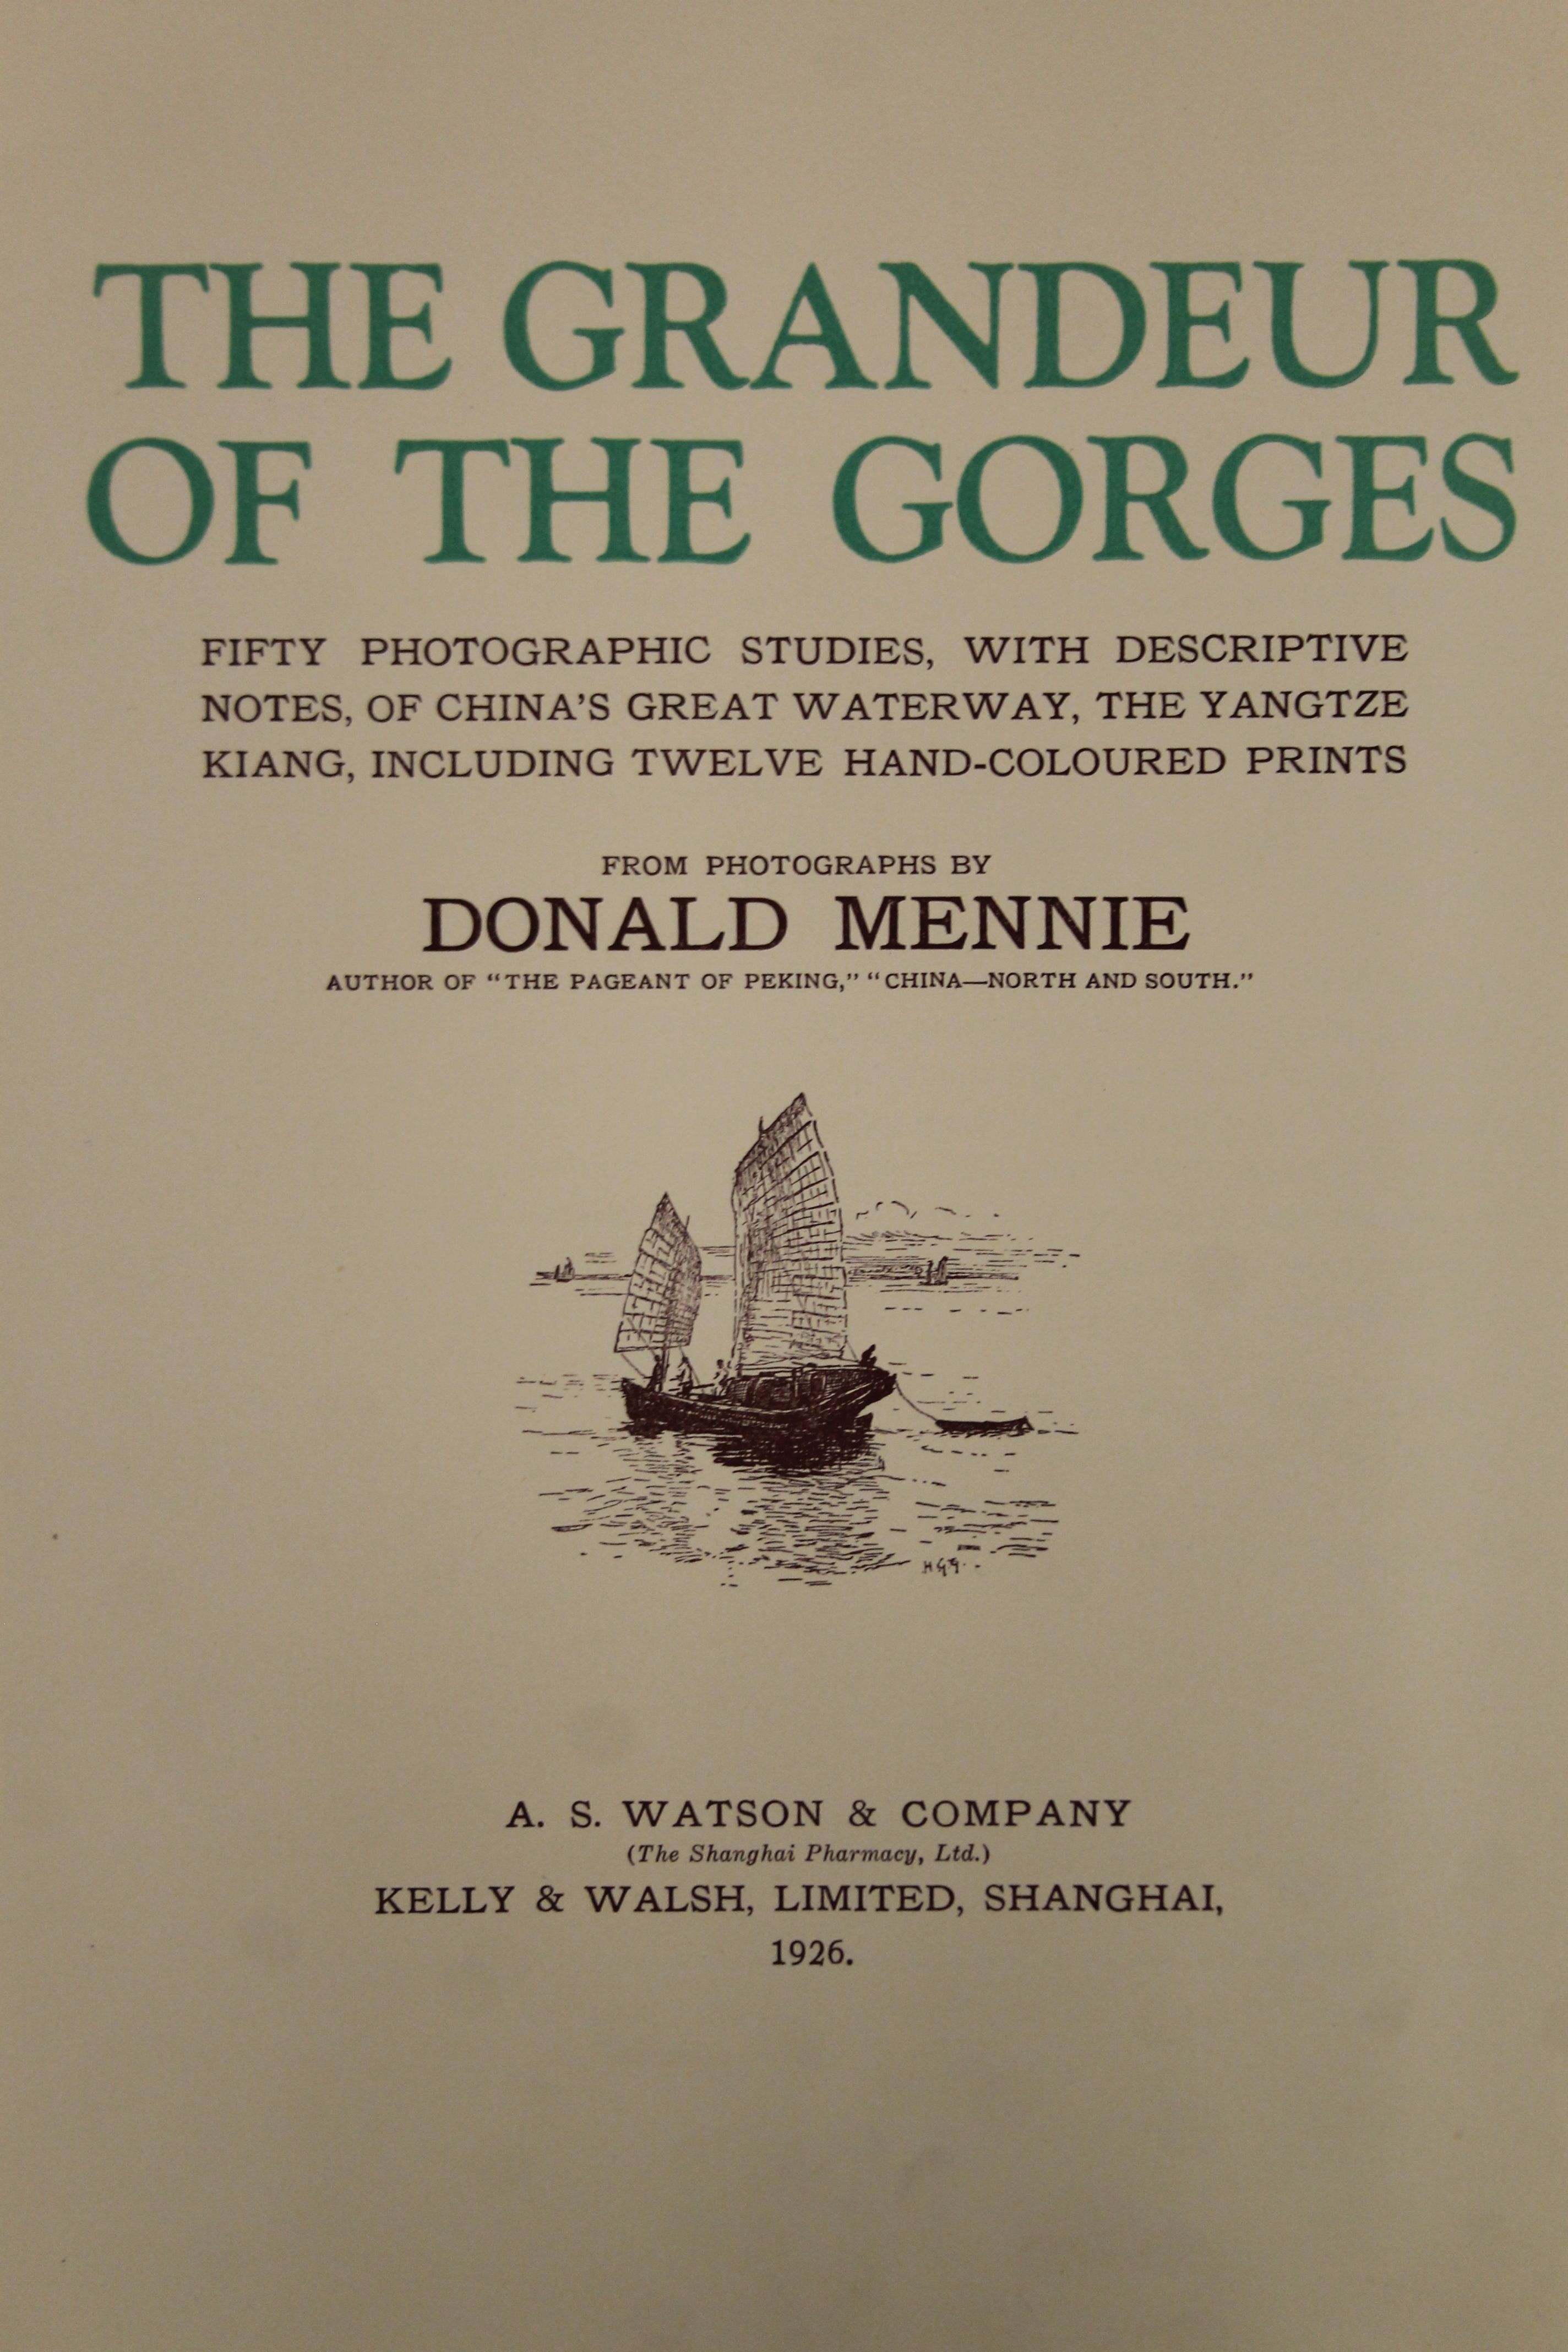 The Grandeur of the Gorges, 1926, from photographs by Donald Mennie, 1st edition, numbered 719/1000, - Image 5 of 11